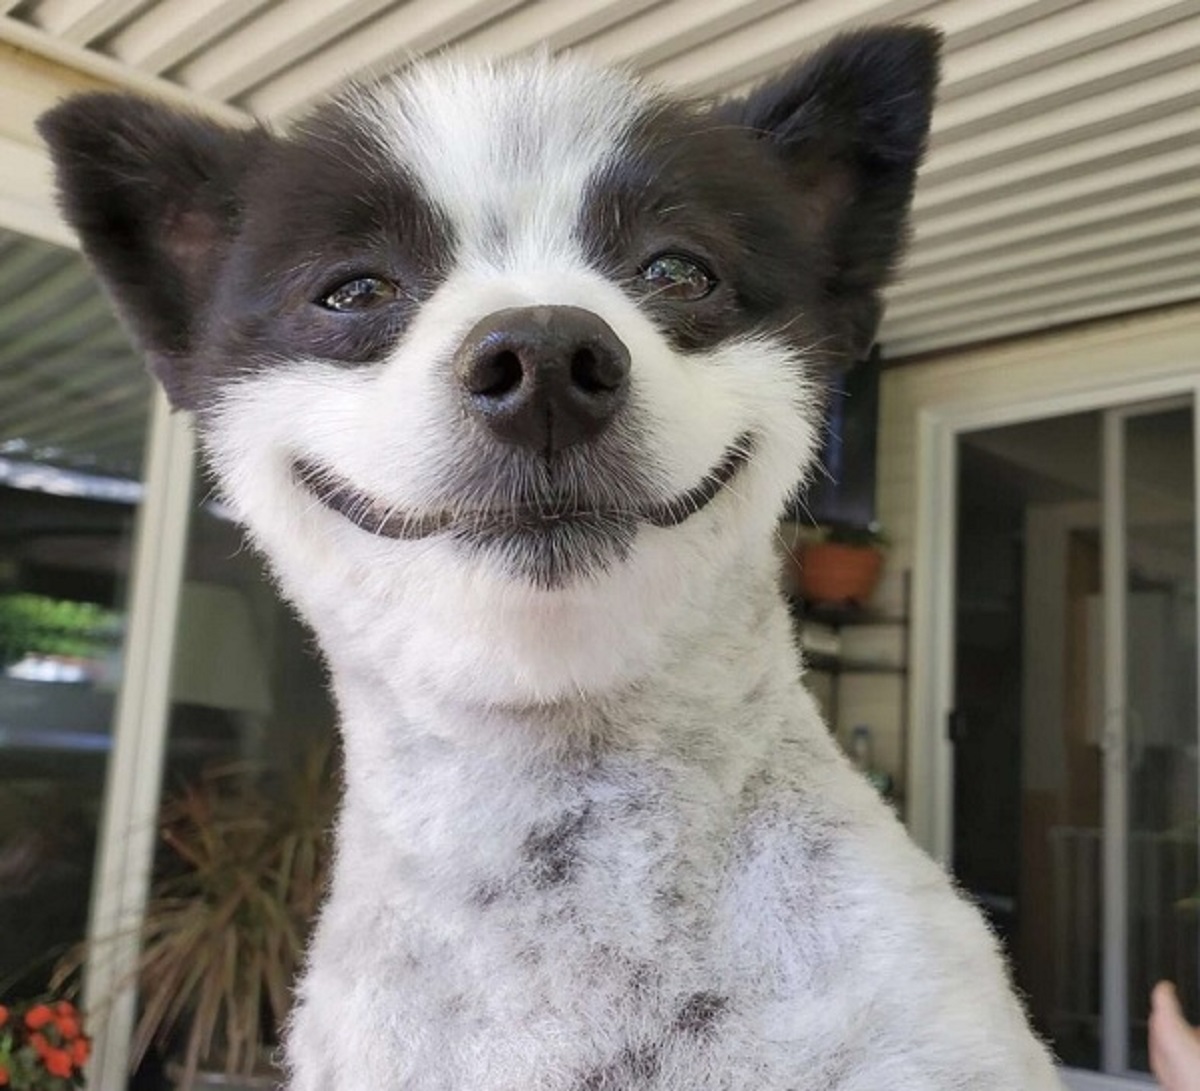 This Little Dog Who Won’t Stop Smiling Is The Happiest Thing You’ll See All Day